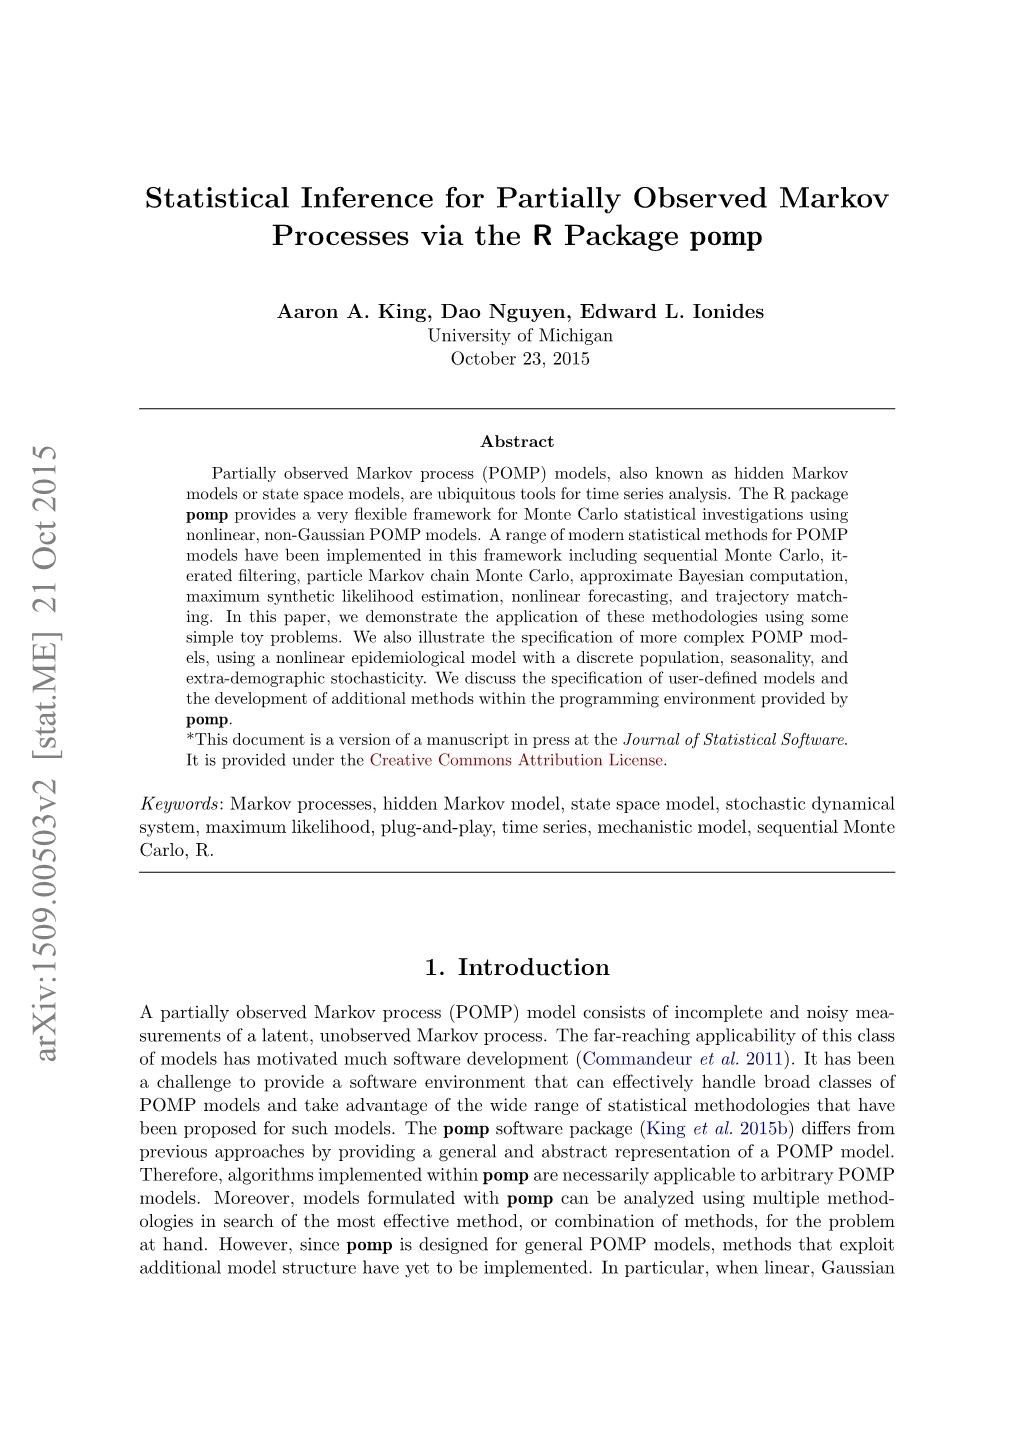 Statistical Inference for Partially Observed Markov Processes Via the R Package Pomp